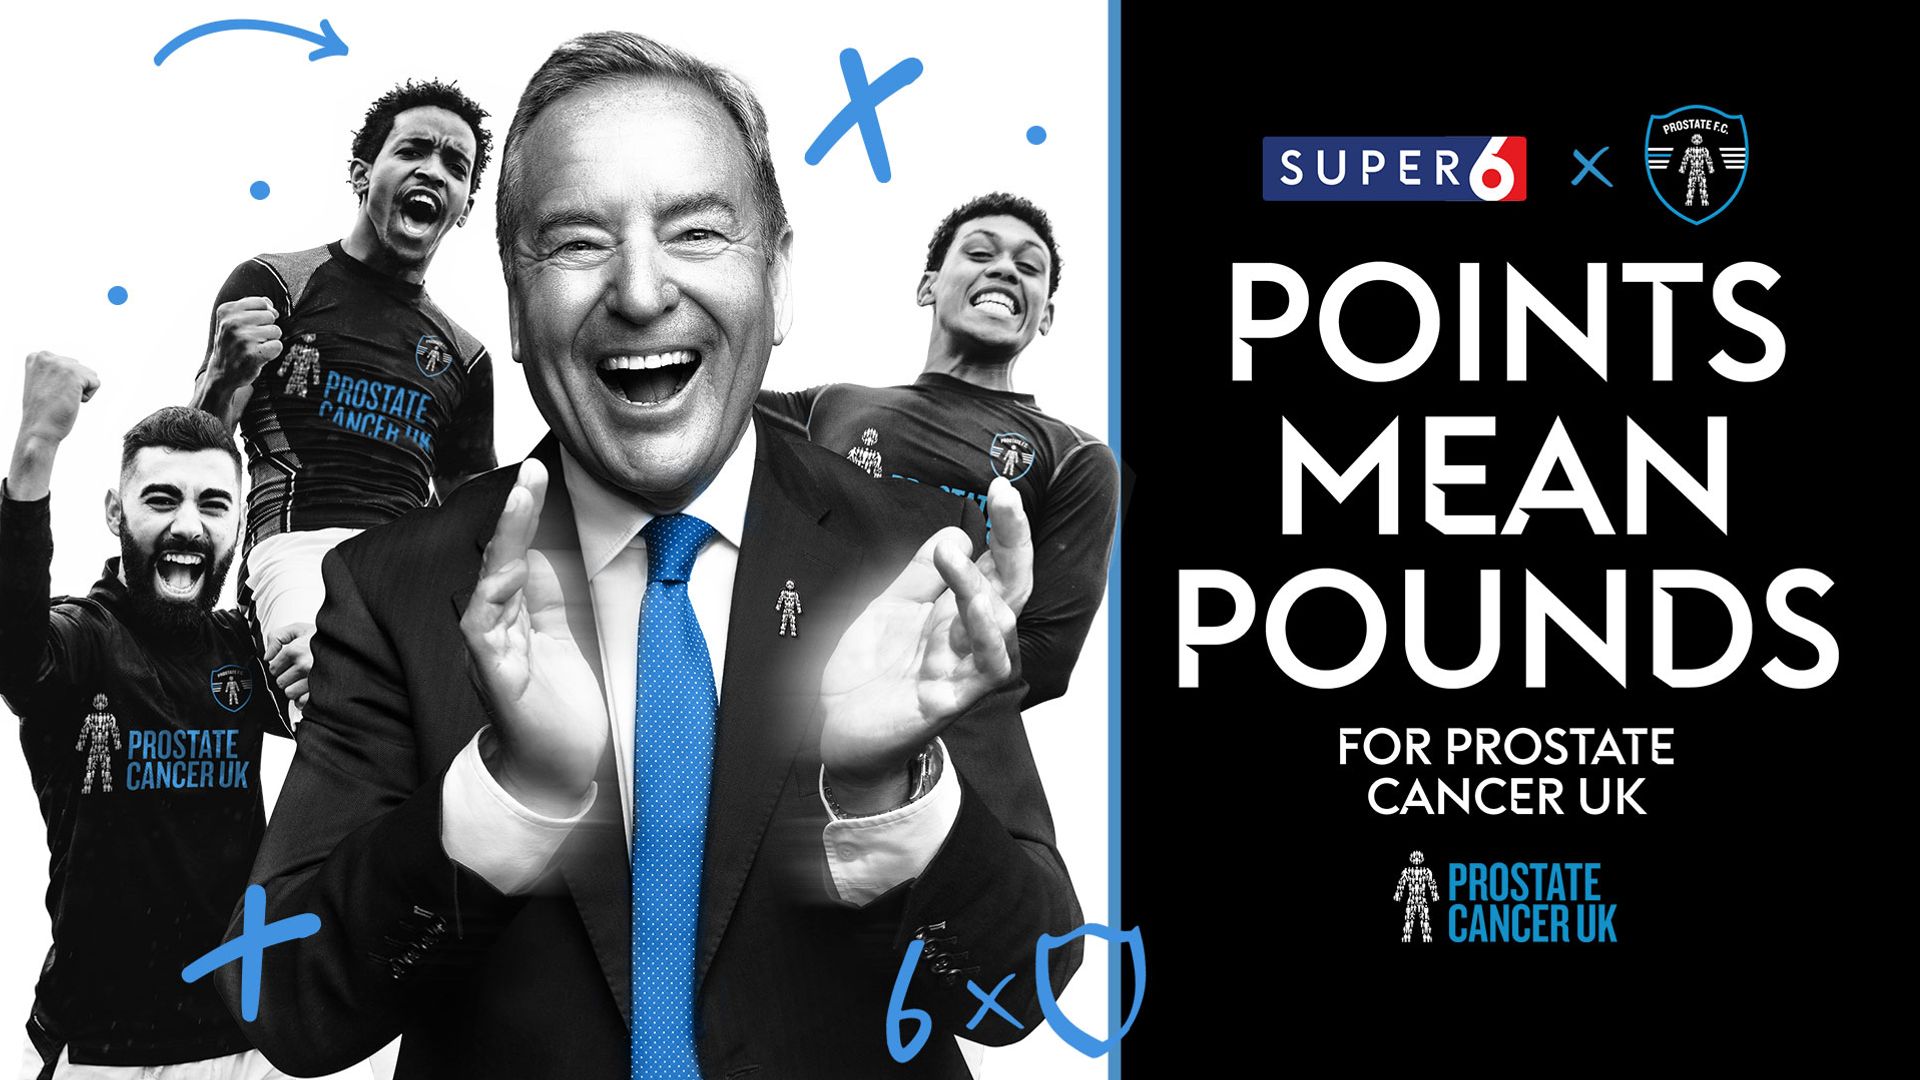 Super 6: Points Mean Pounds for Prostate Cancer